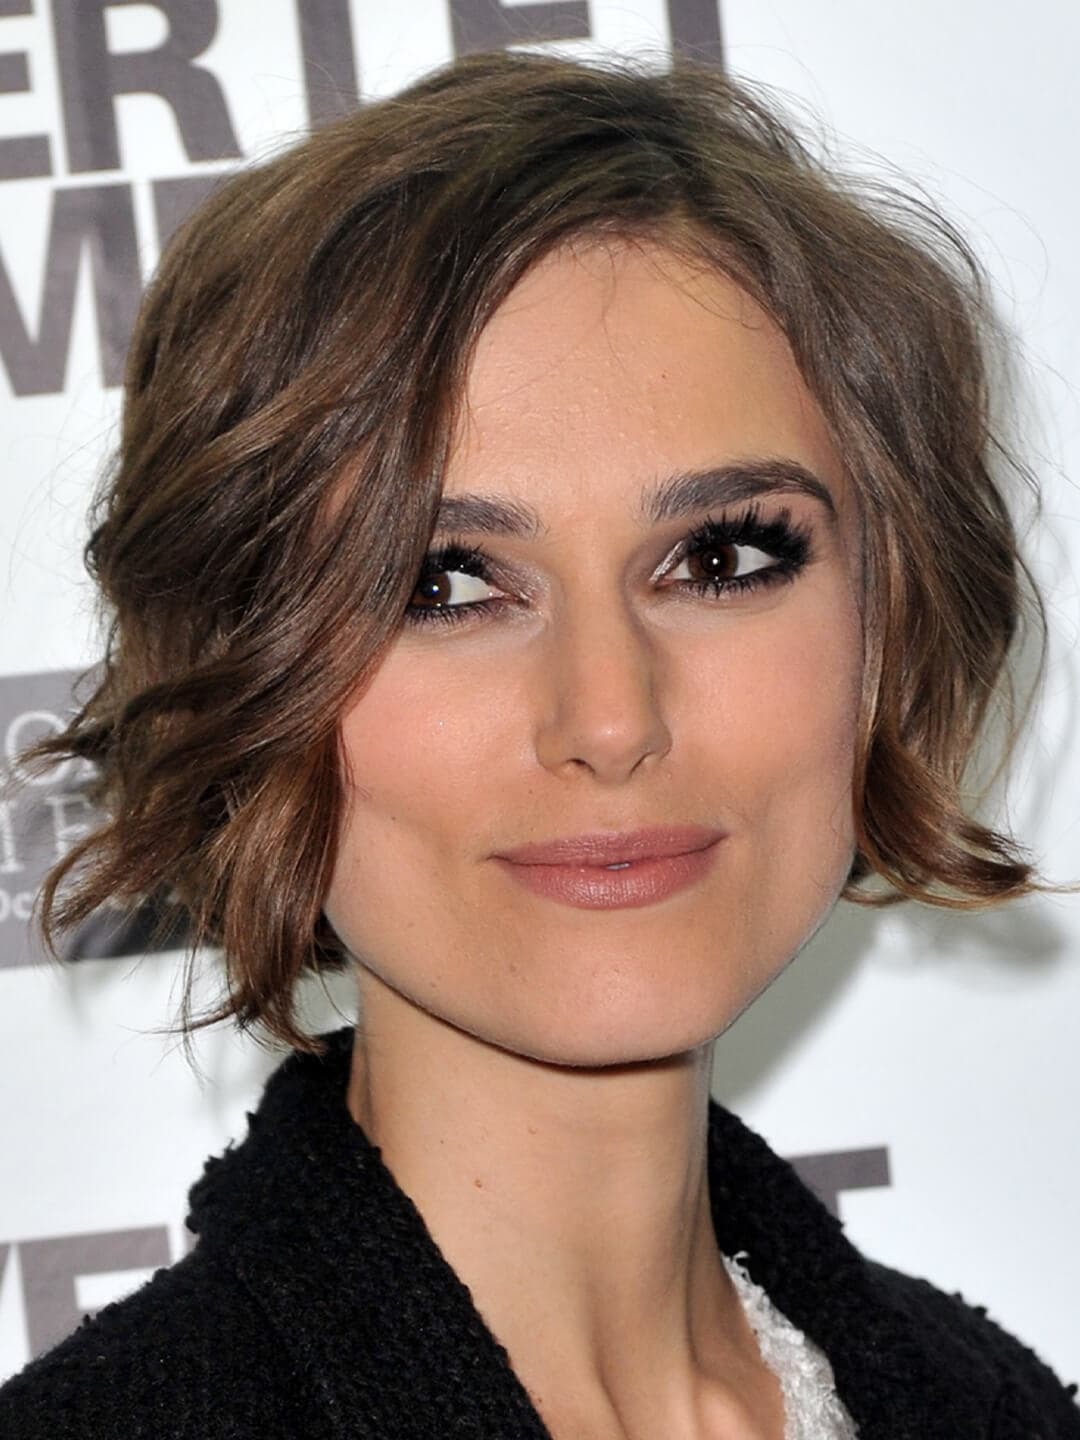 Keira Knightley sporting a textured bob hairstyle